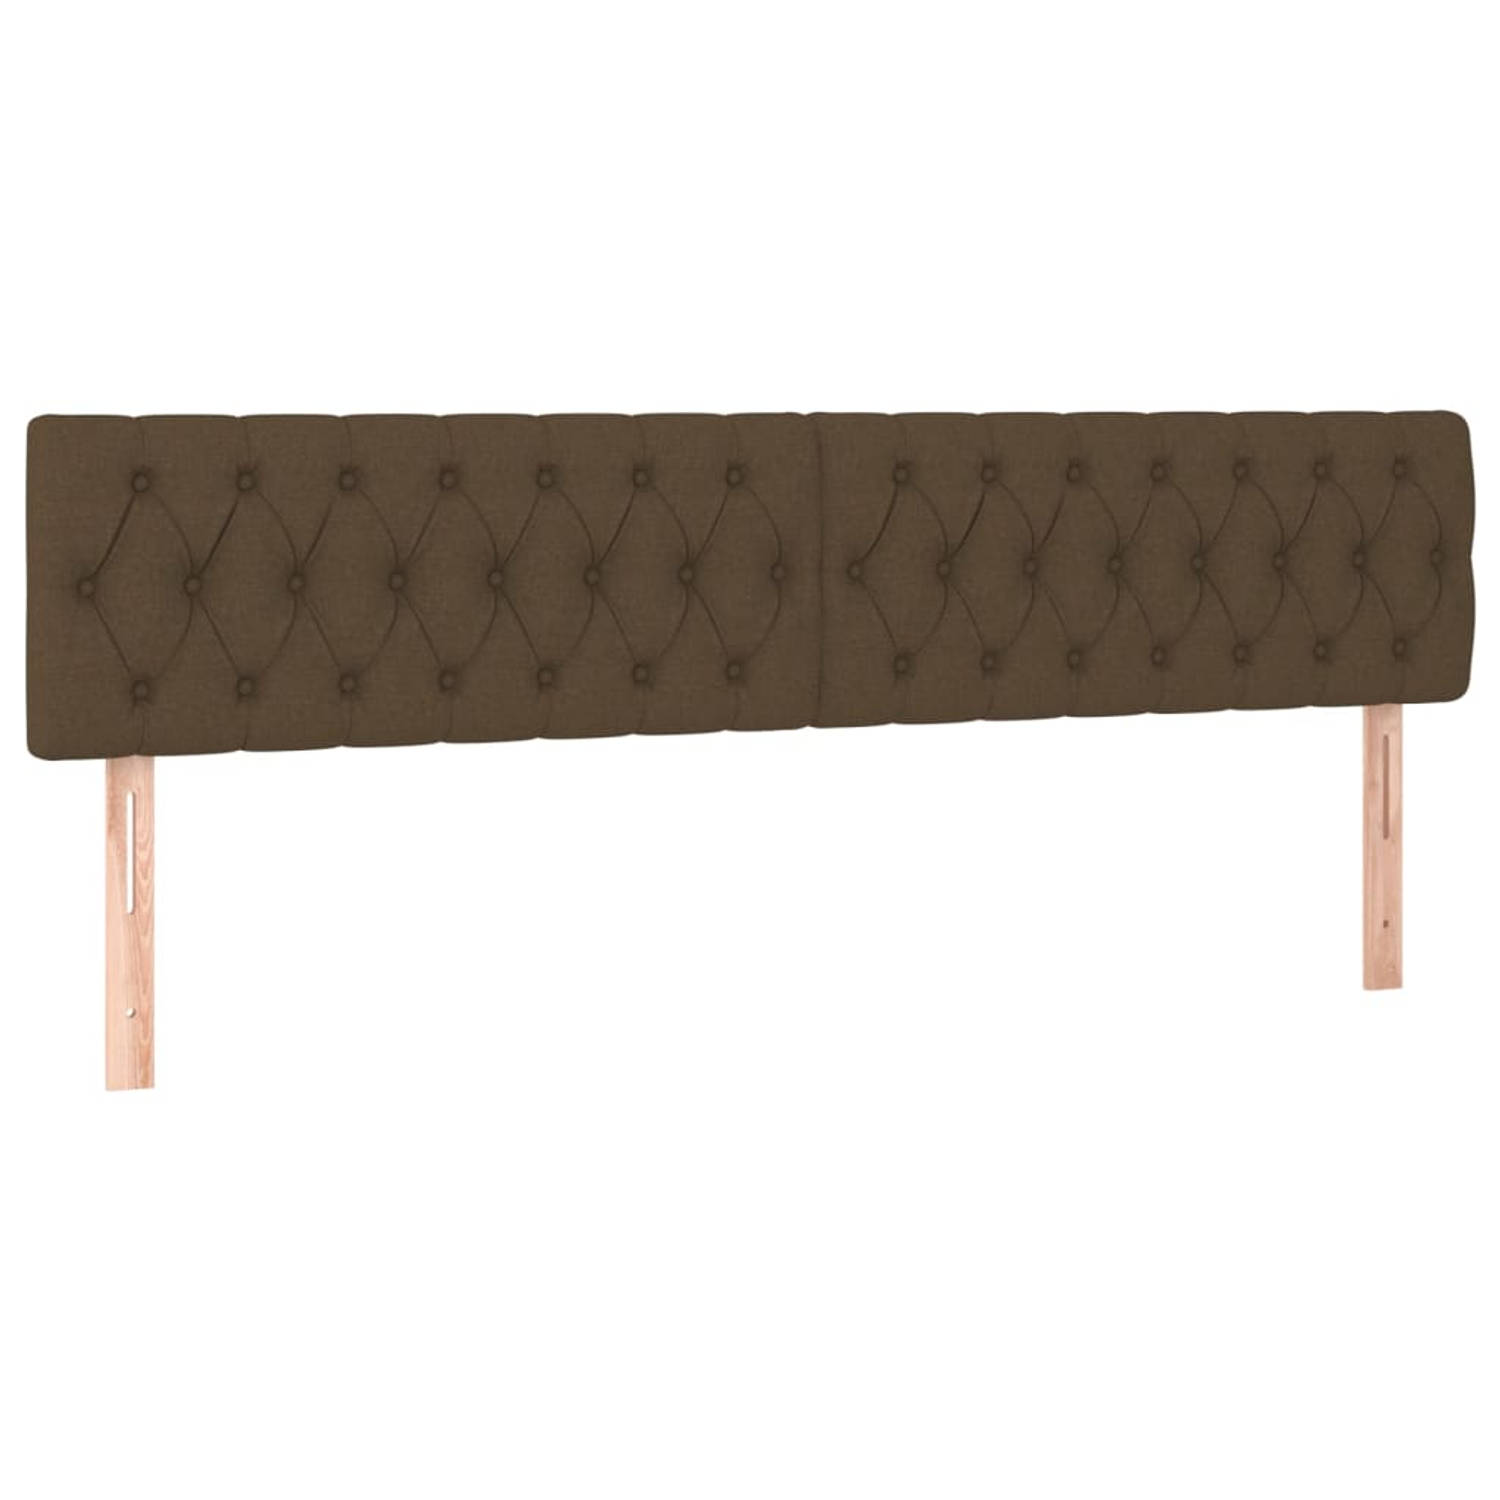 The Living Store Hoofdbord Classic - Bedaccessoires - 200x7x78/88cm - Donkerbruin